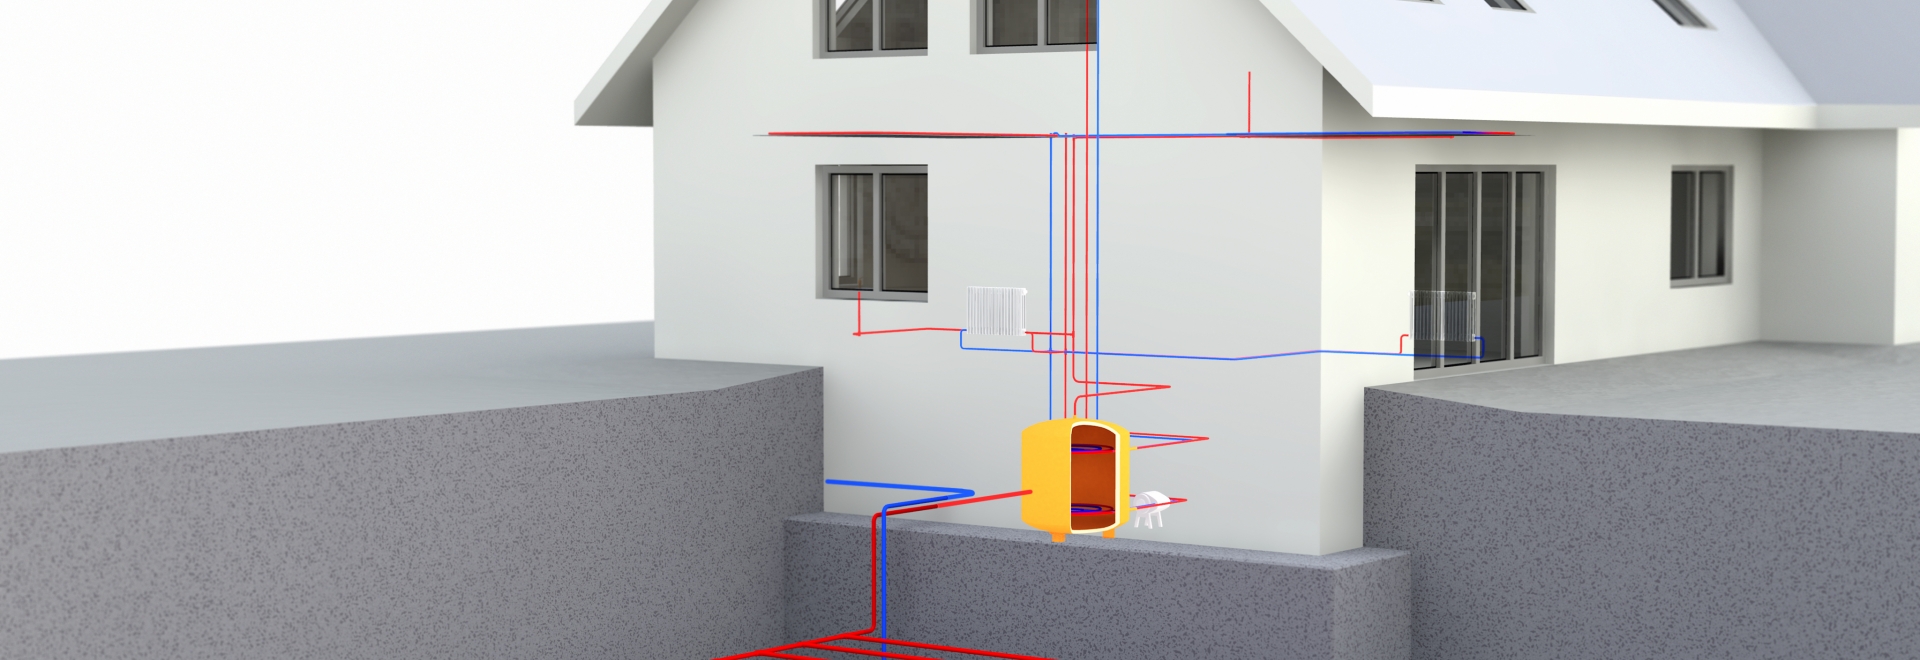 3D rendering of geothermal system in residential home